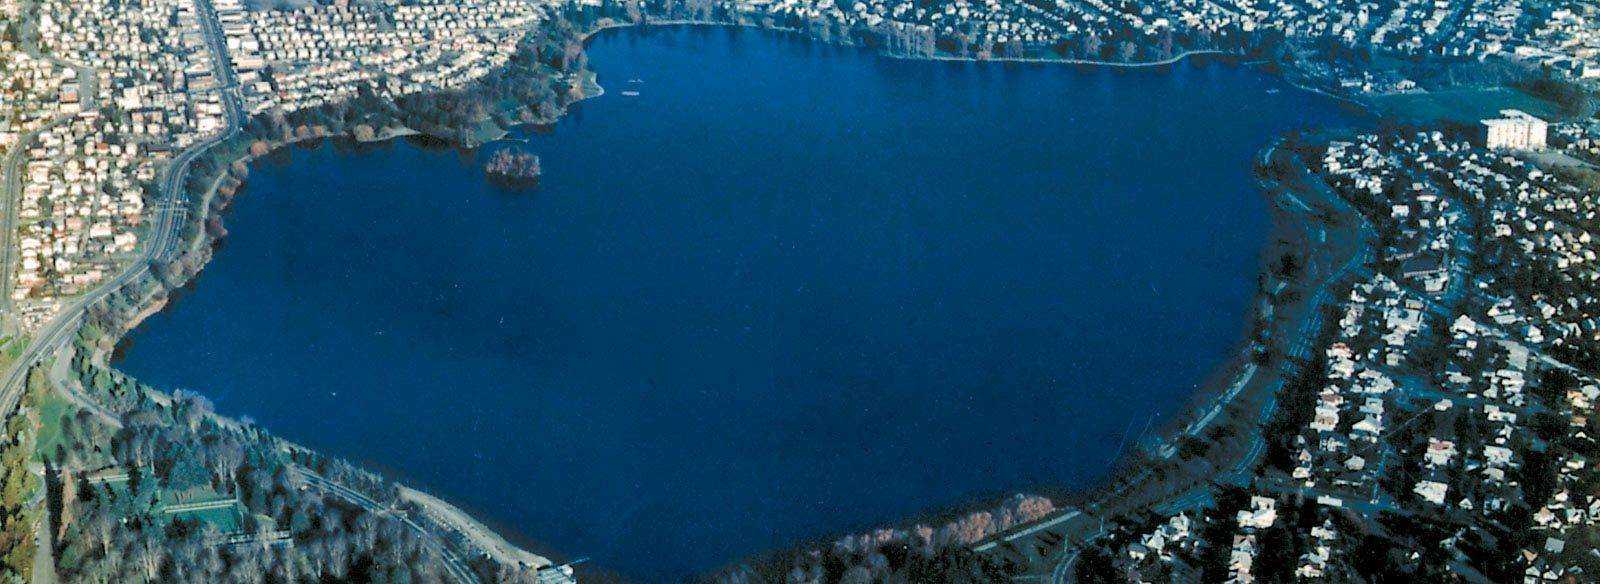 Aerial Shot of a Lake in Seattle, USA